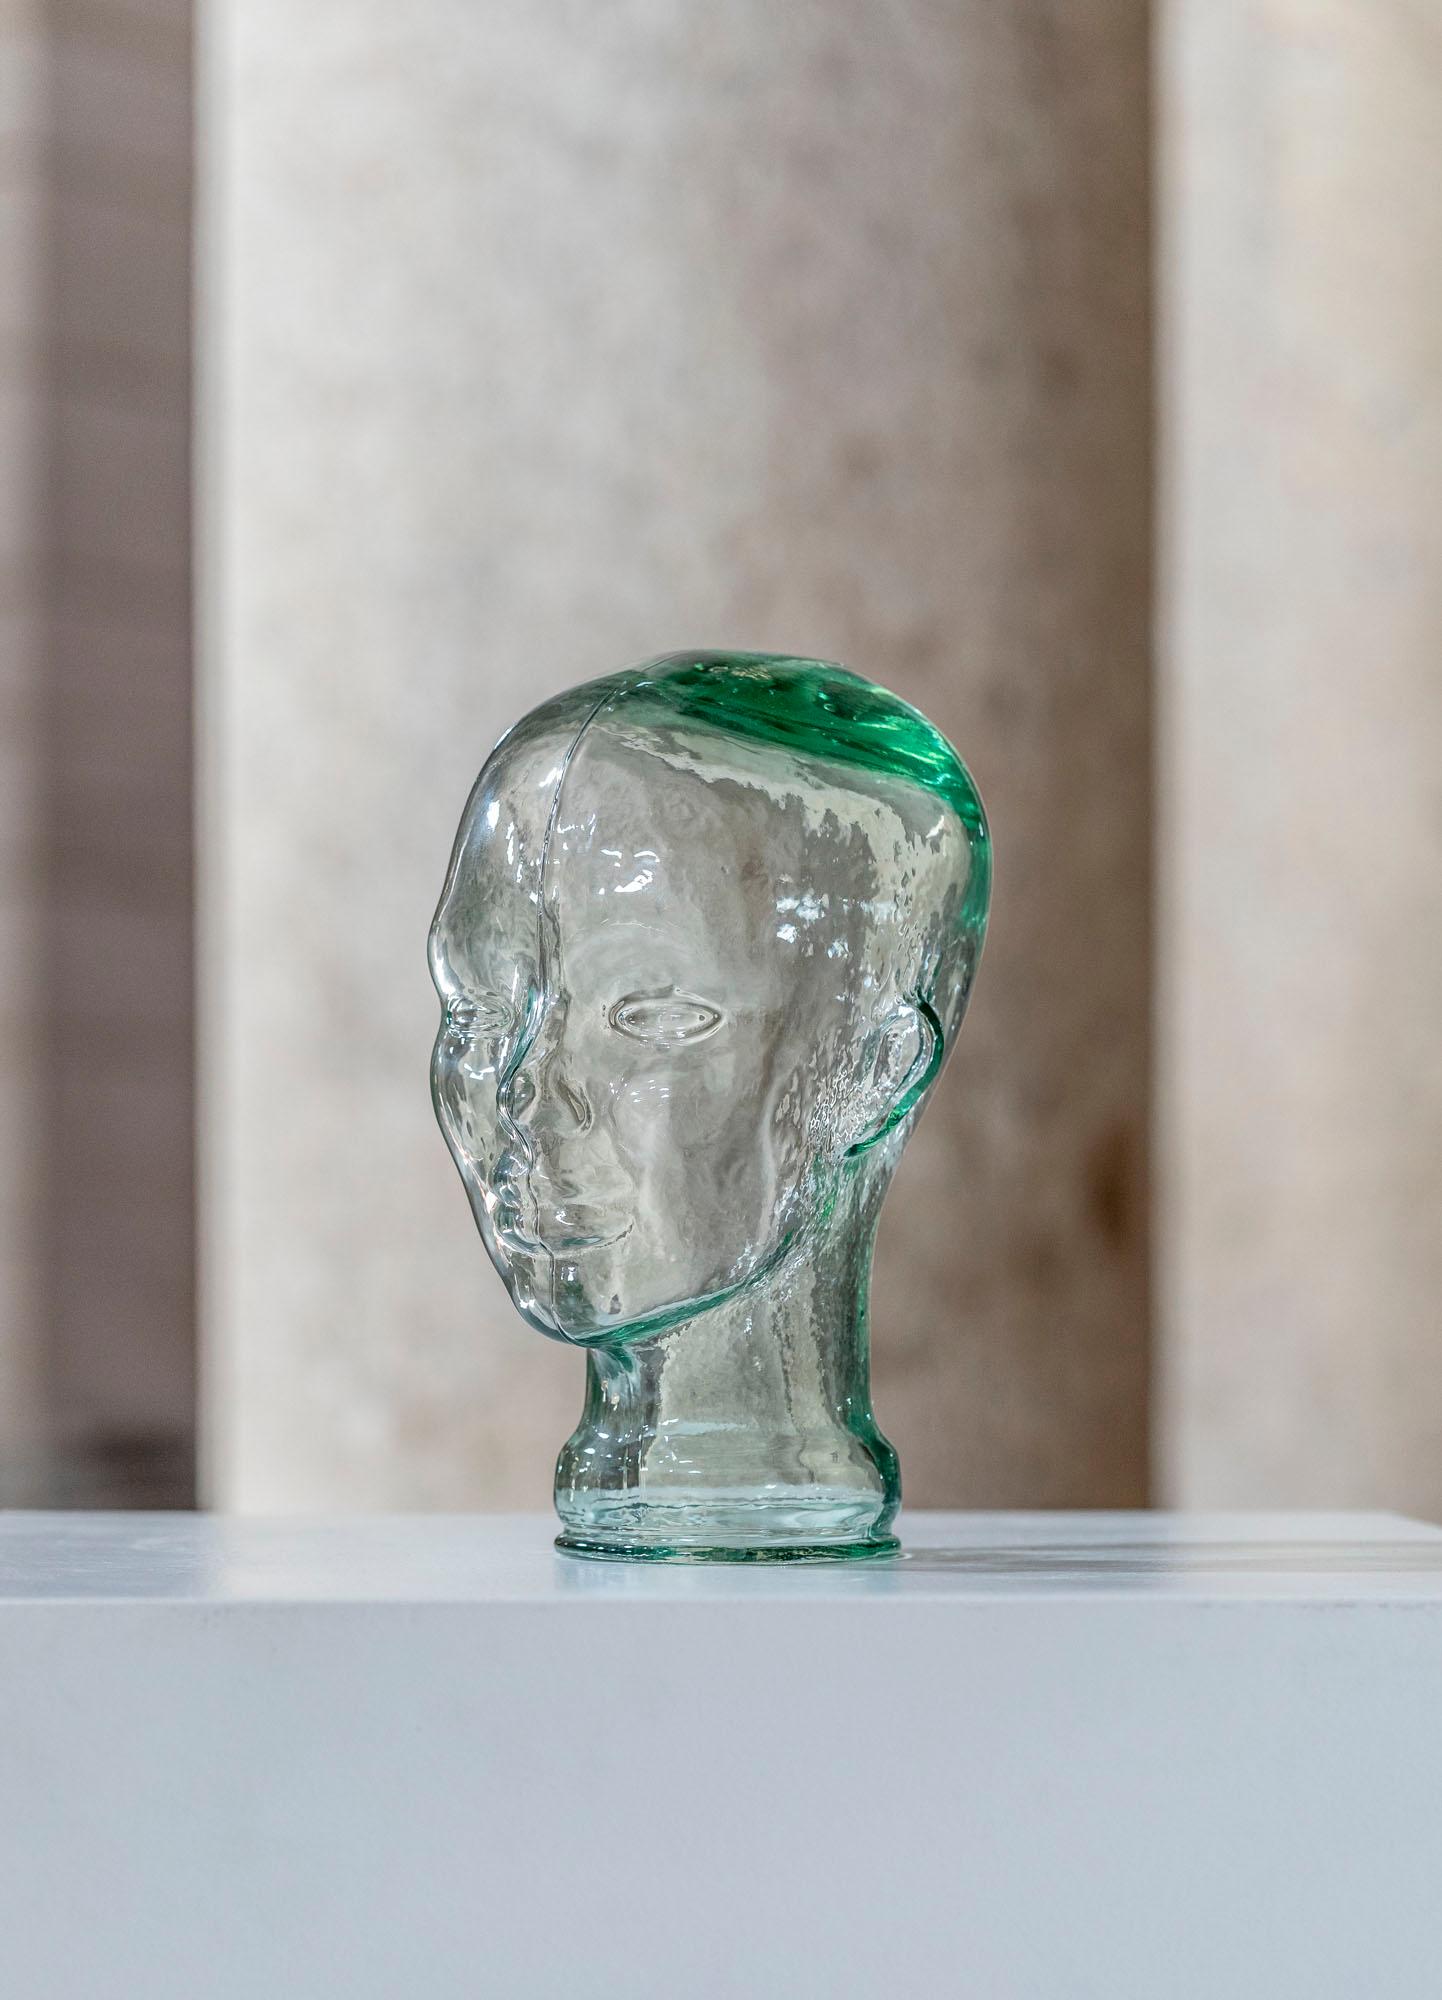 Vintage glass mannequin head, attributed to Piero Fornasetti Italy, circa 1960.
Beautiful glass head in the tone of teal.